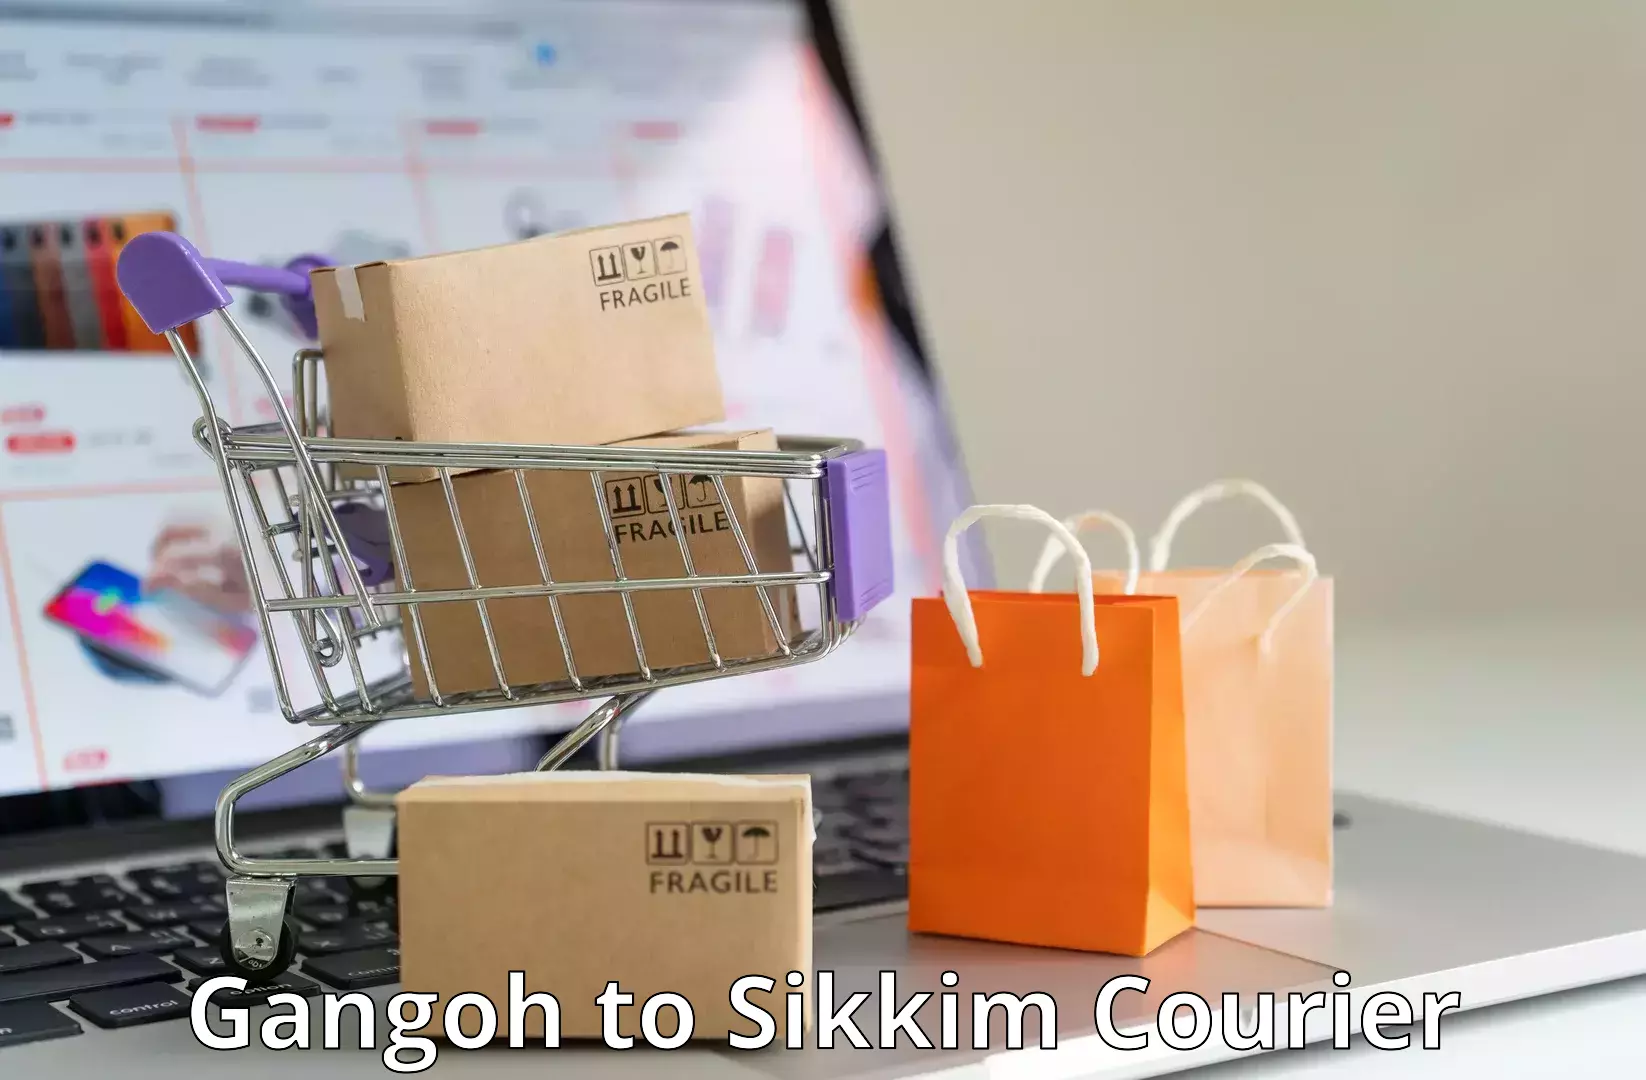 State-of-the-art courier technology Gangoh to South Sikkim